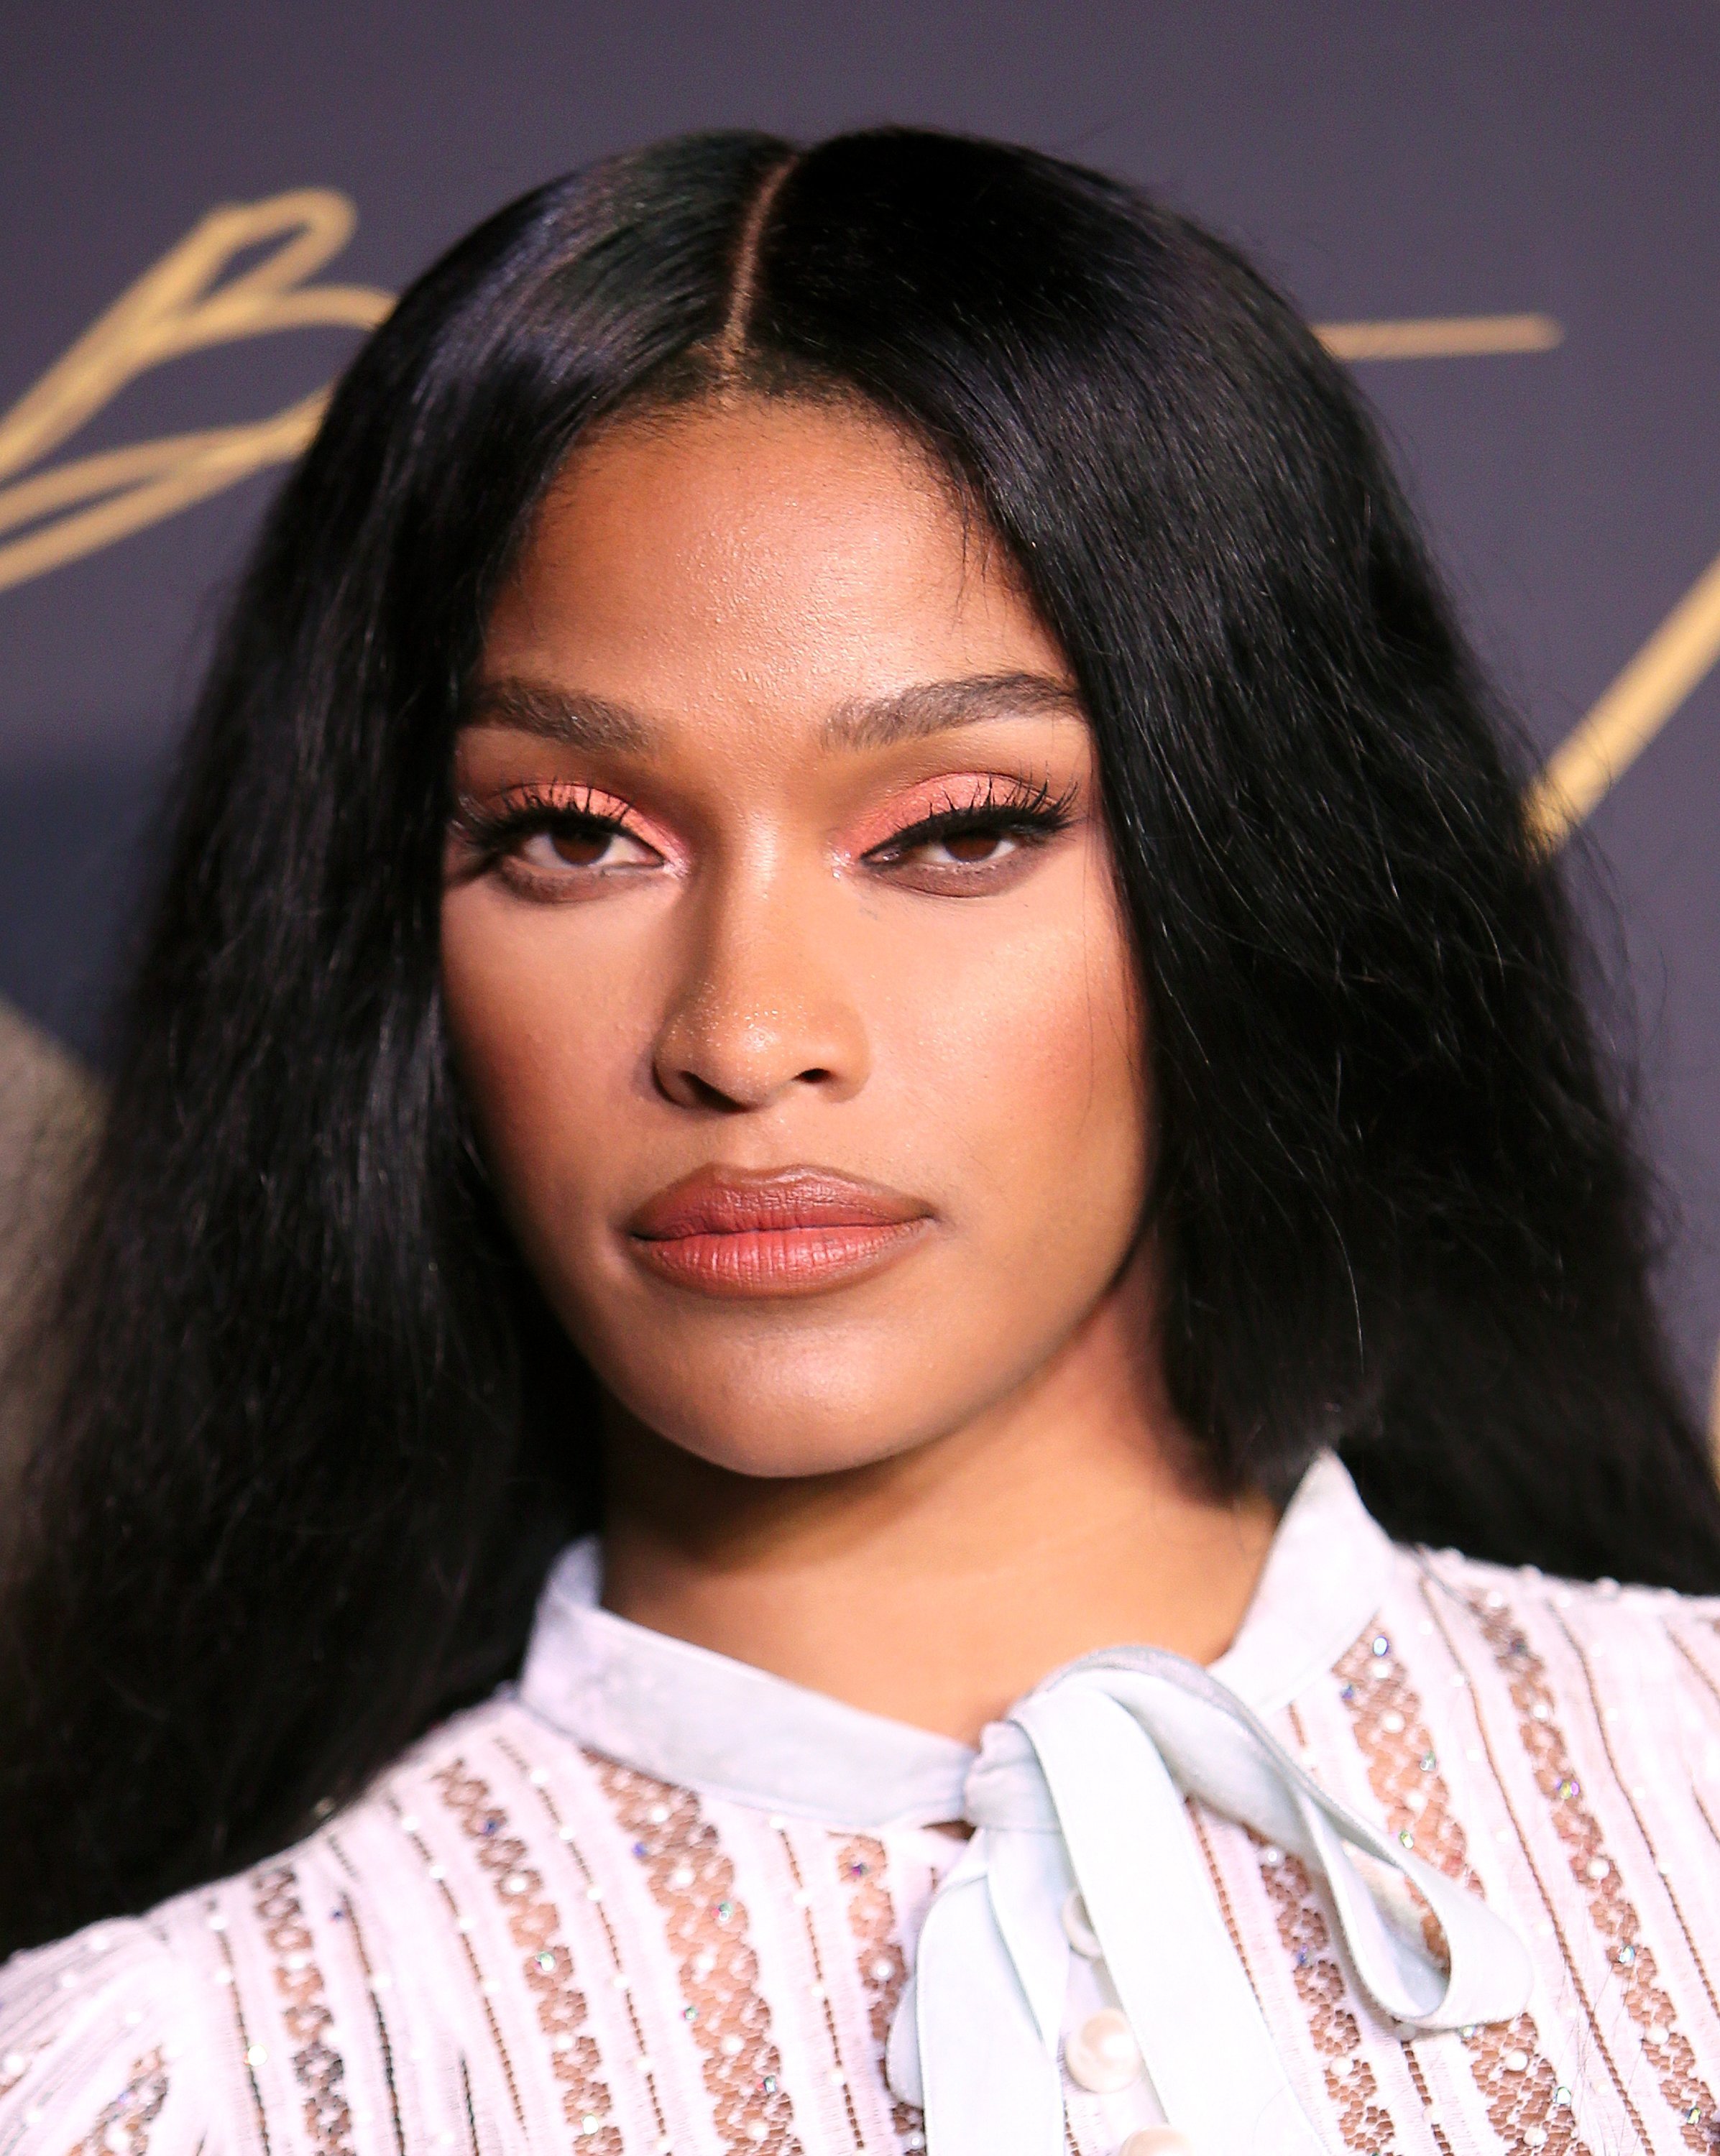 Puerto Rican reality star Joseline Hernandez at the 2017 Maxim Hot 100 party. | Source: Getty Images